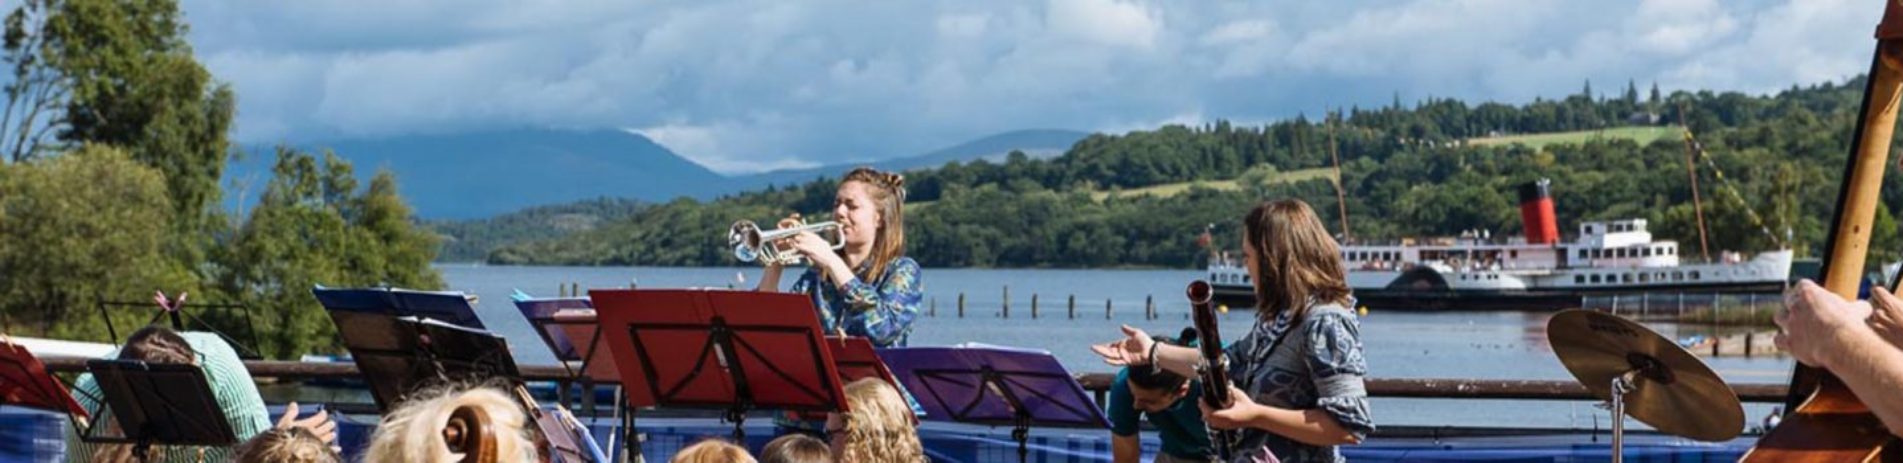 orchestra-playing-at-lomond-shores-balloch-with-loch-lomond-and-maid-of-the-loch-steamship-visible-behind-balloch-festival-two-thousand-eighteen